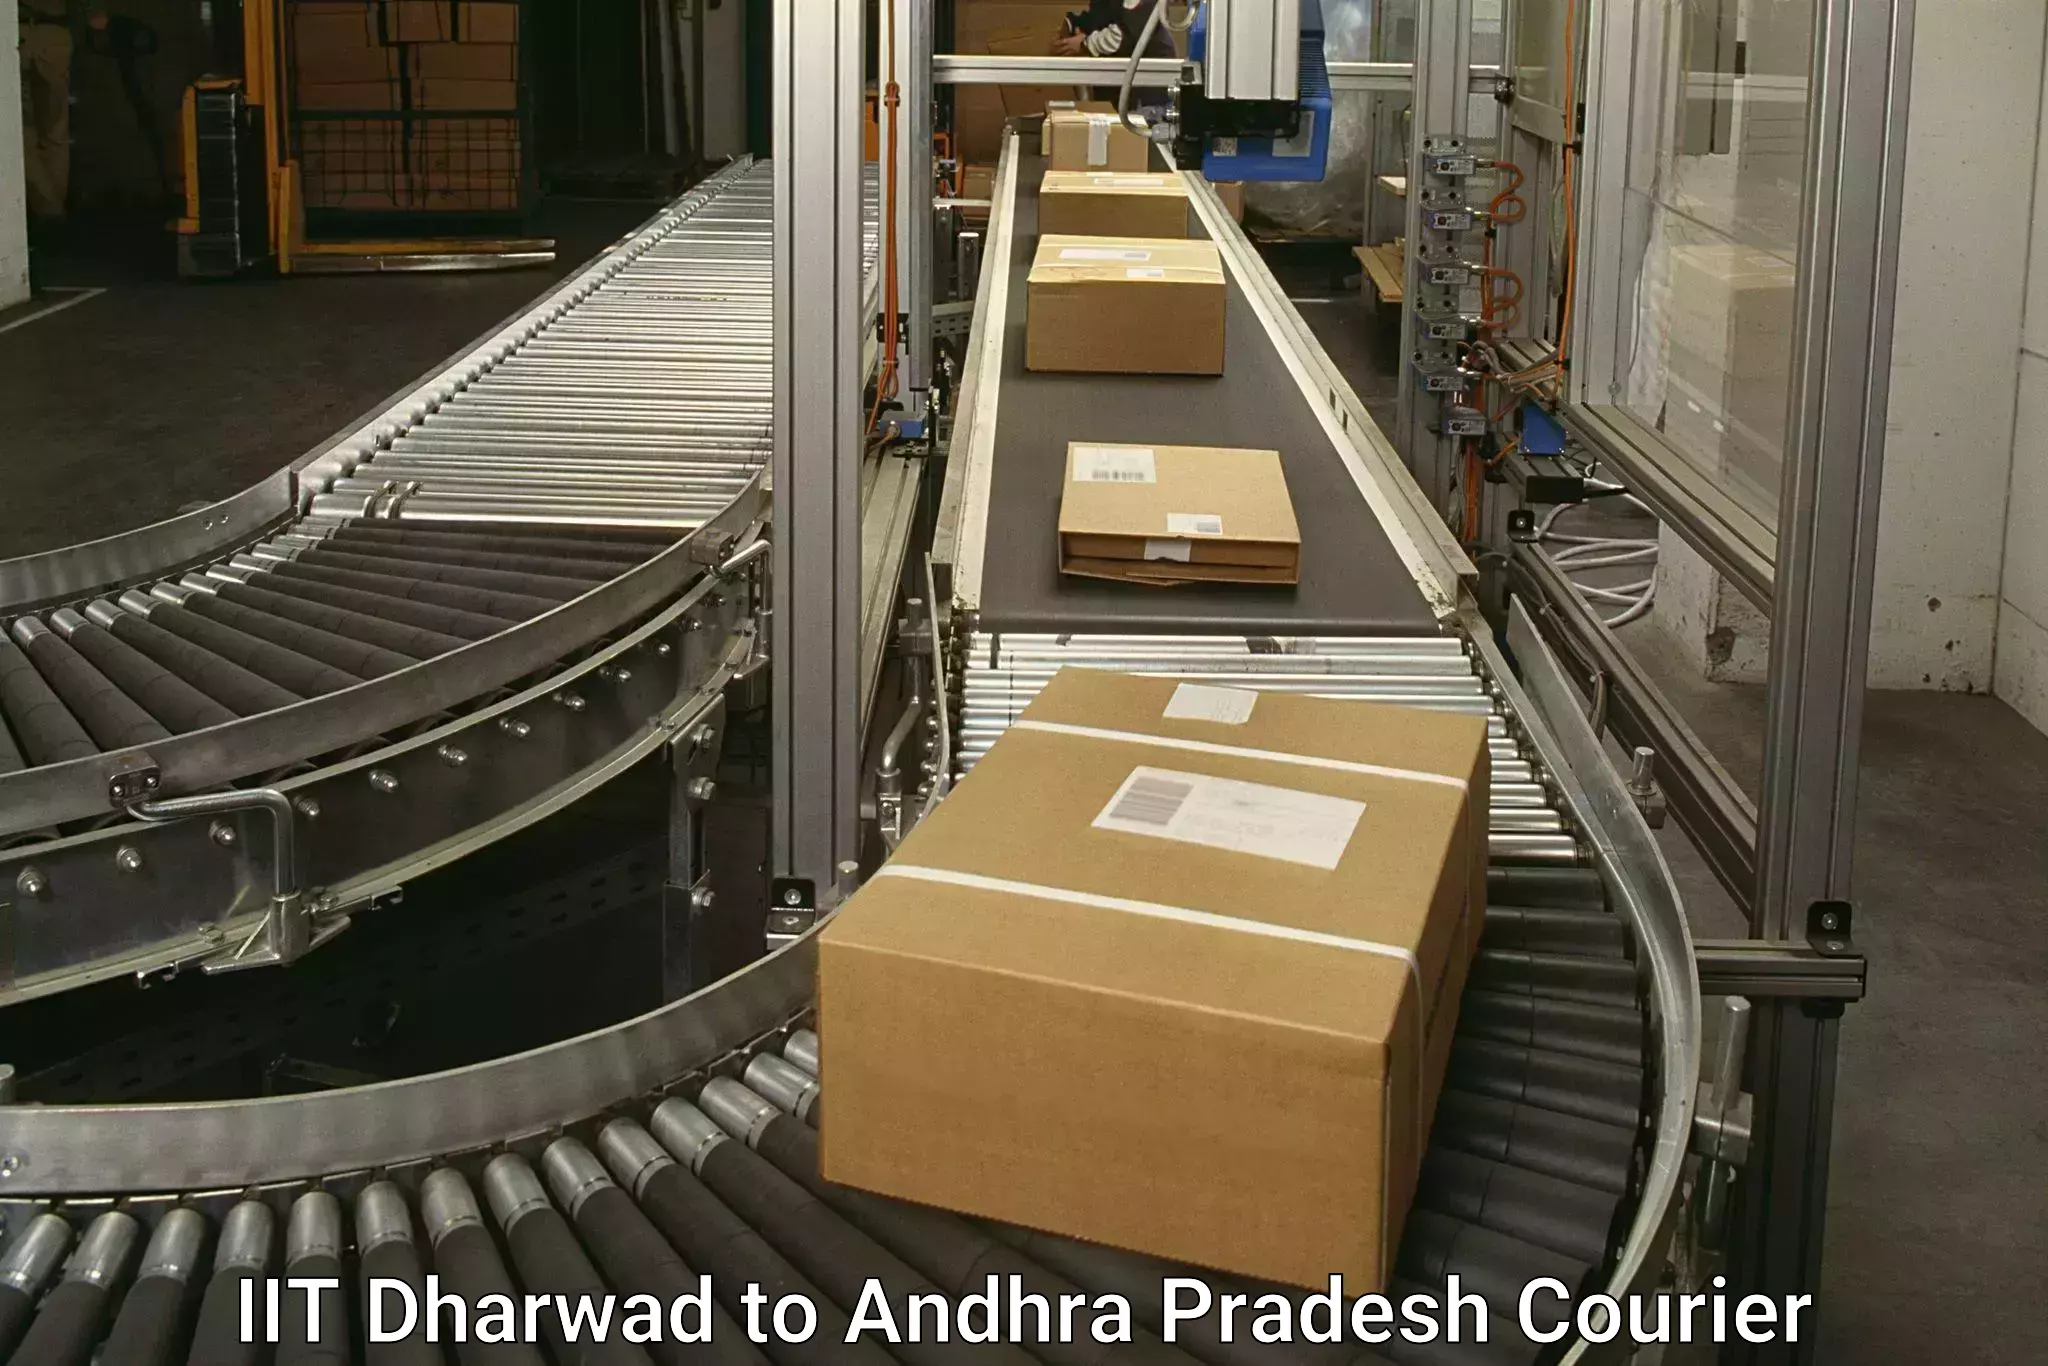 Premium courier solutions IIT Dharwad to Anantapur